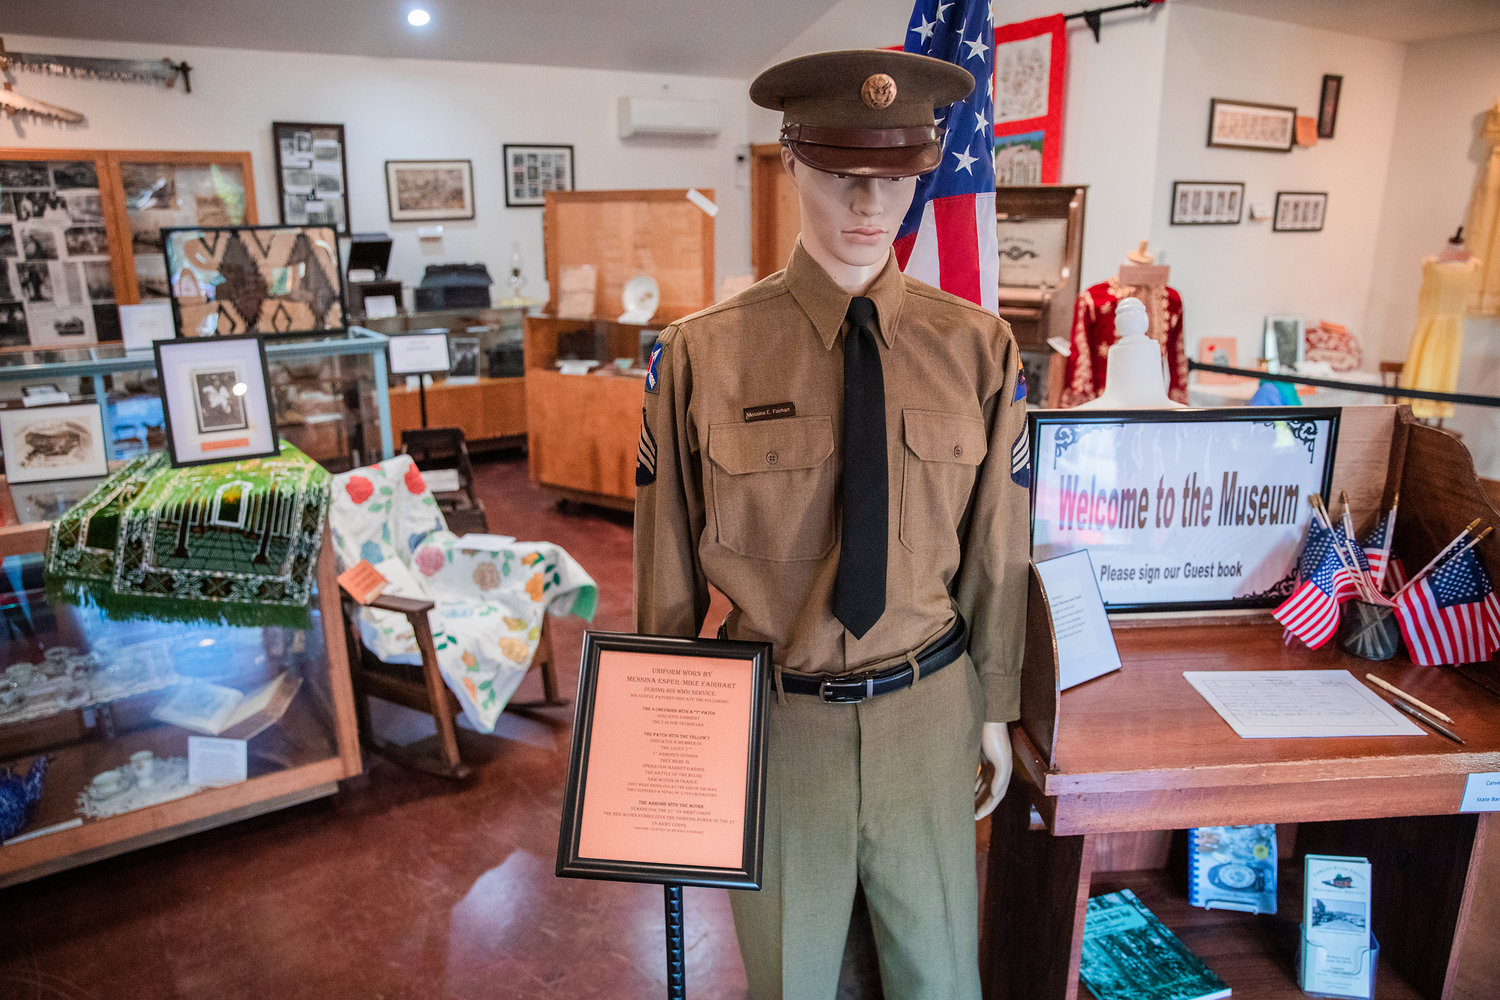 A military uniform worn by Messina Esper Fairhart sits on display Wednesday at the Morton Historical Museum.